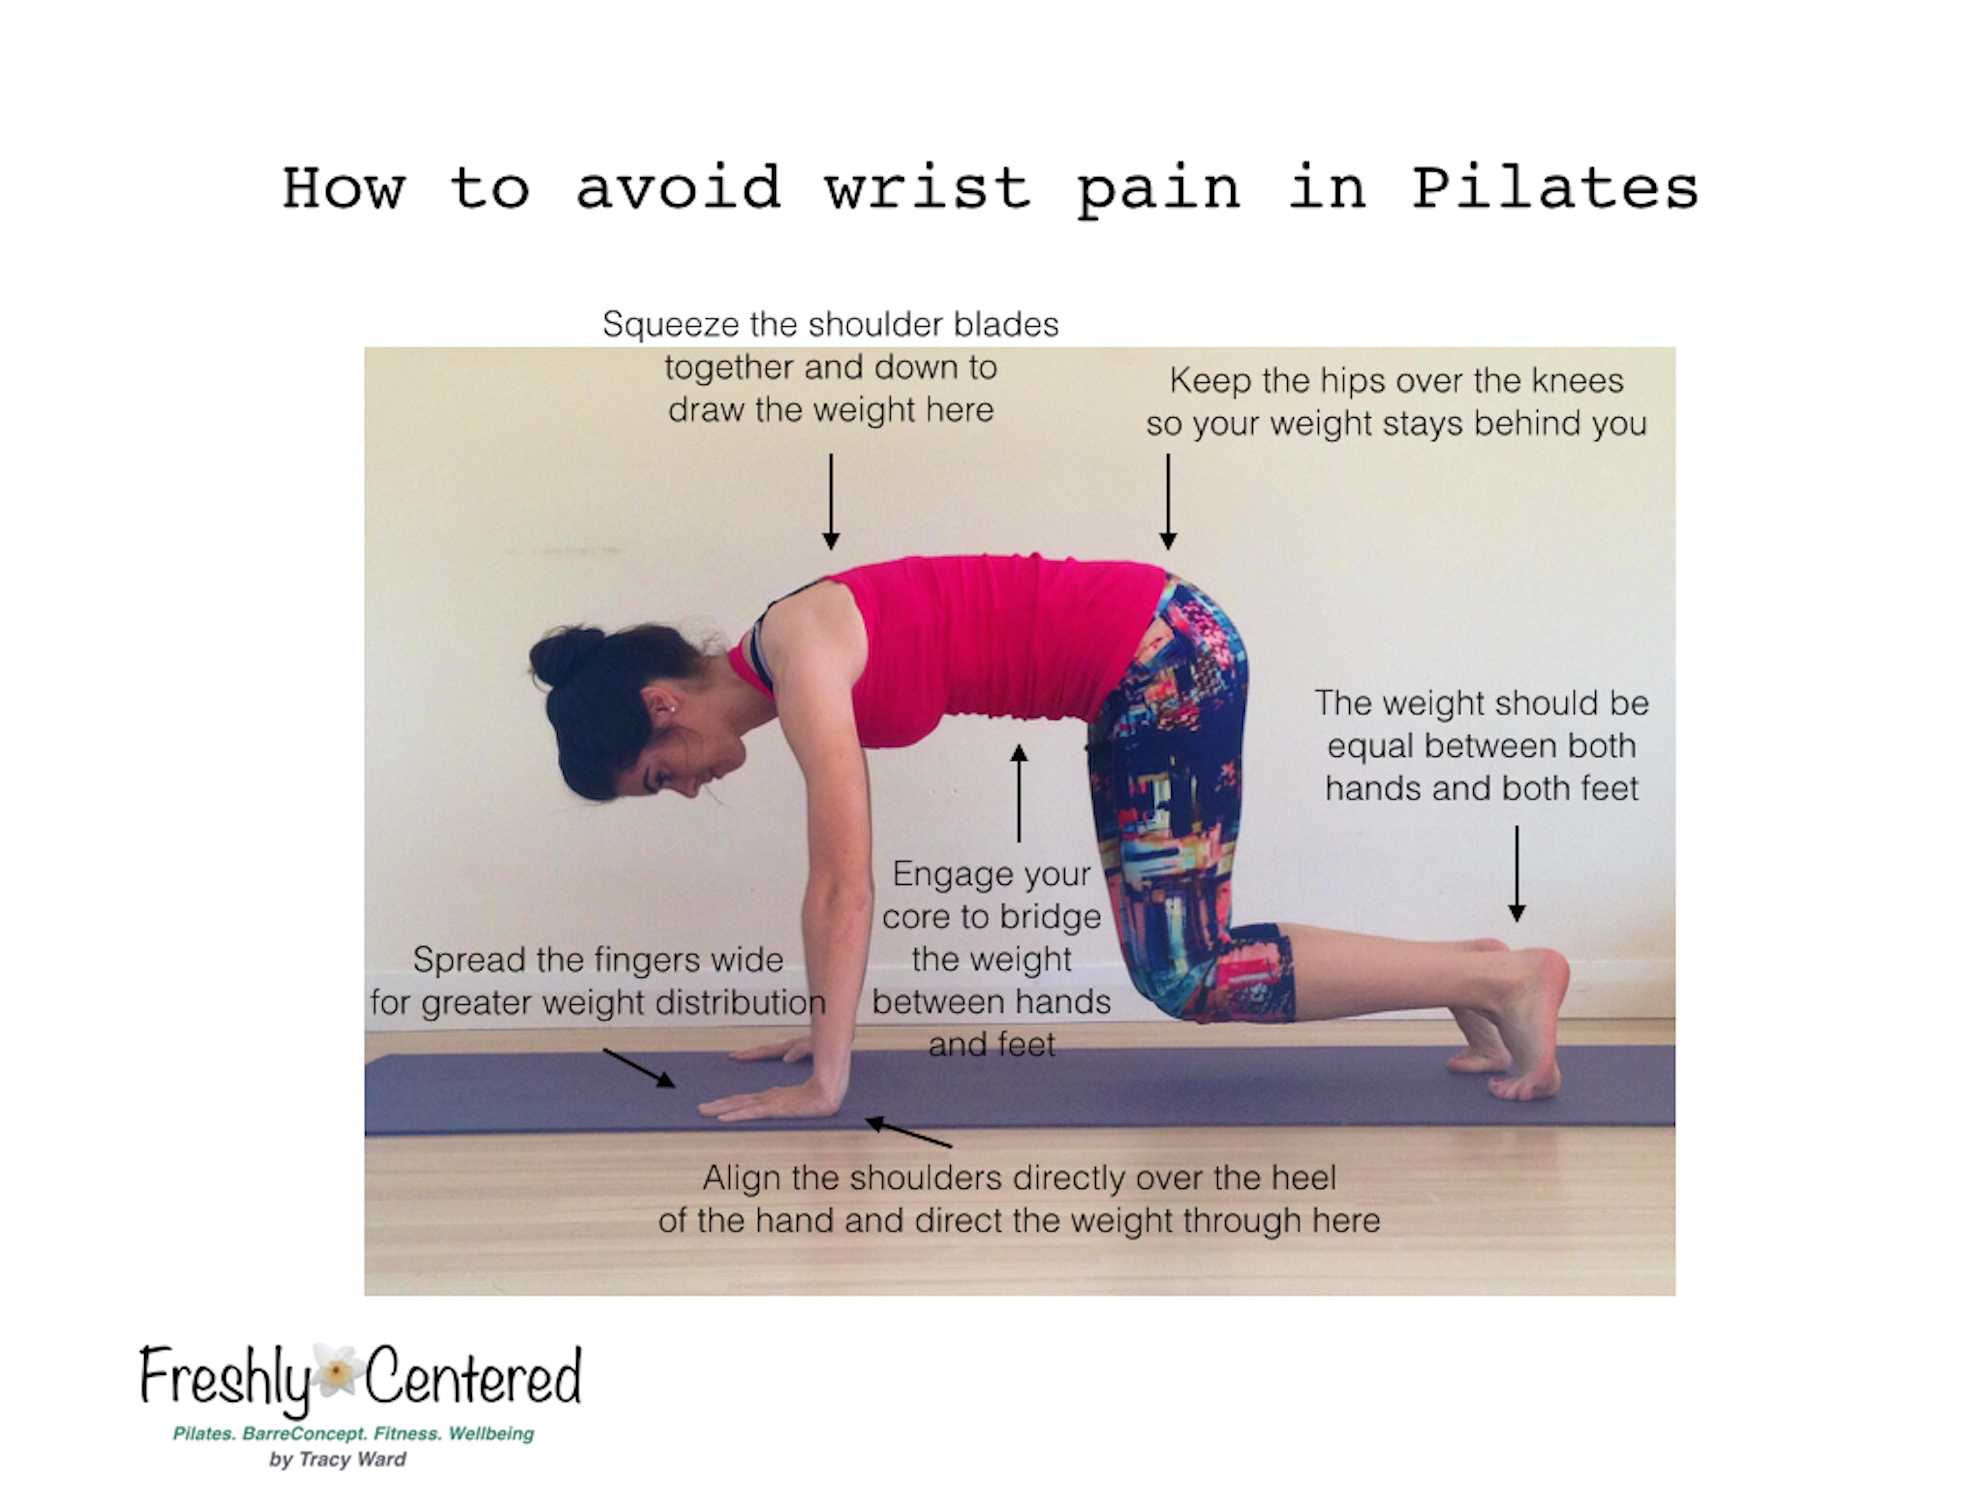 How to use physiotherapy to deal with Wrist pain From Yoga